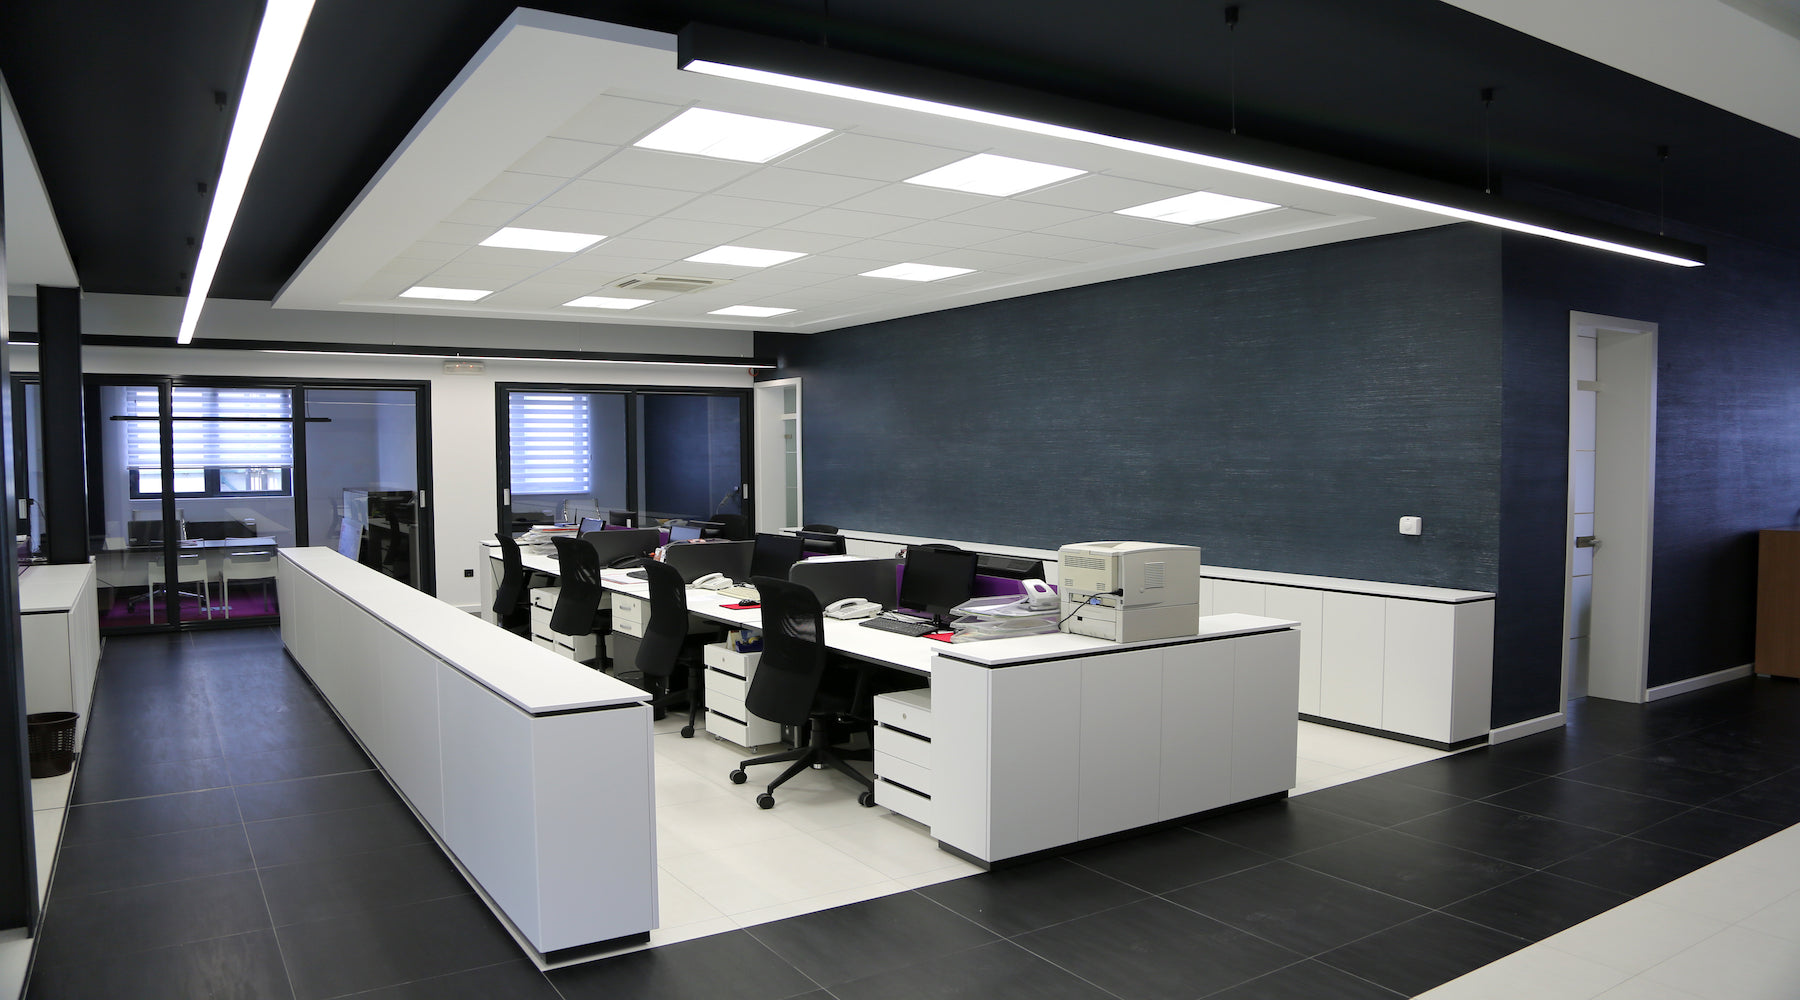 Office lighting installed in office with modern style drop ceiling